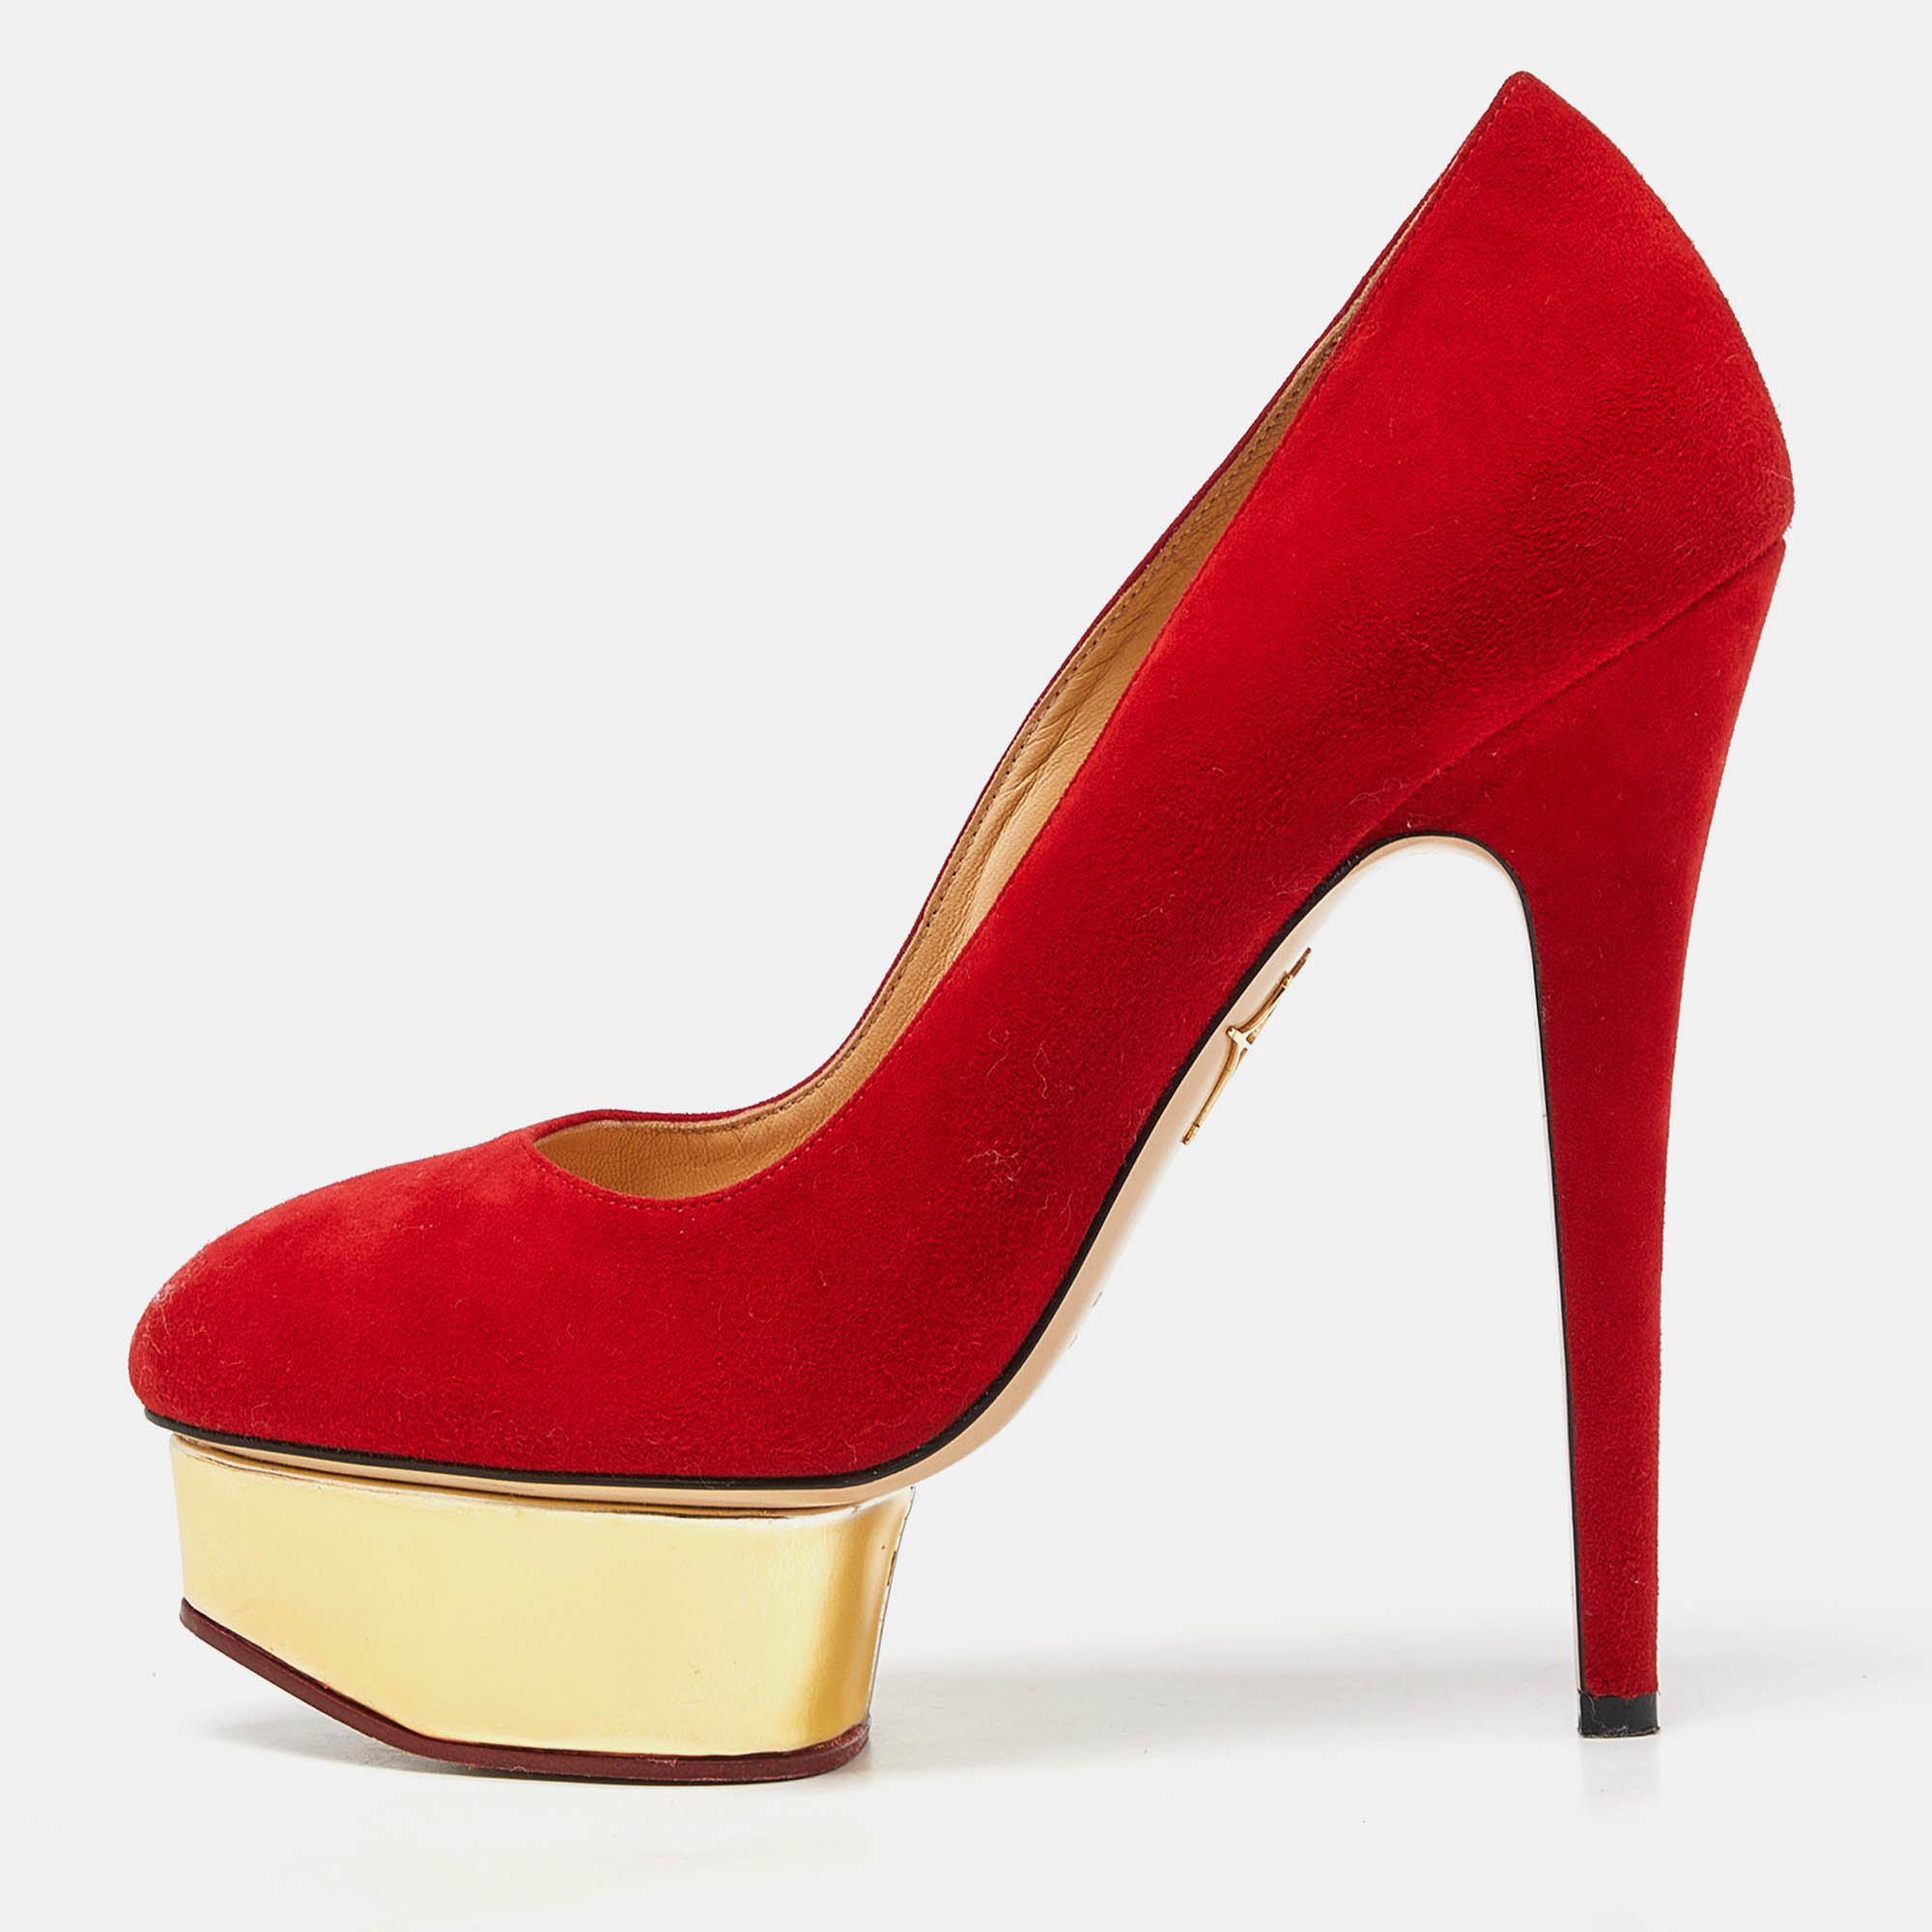 Charlotte olympia red suede dolly platform pumps size 37